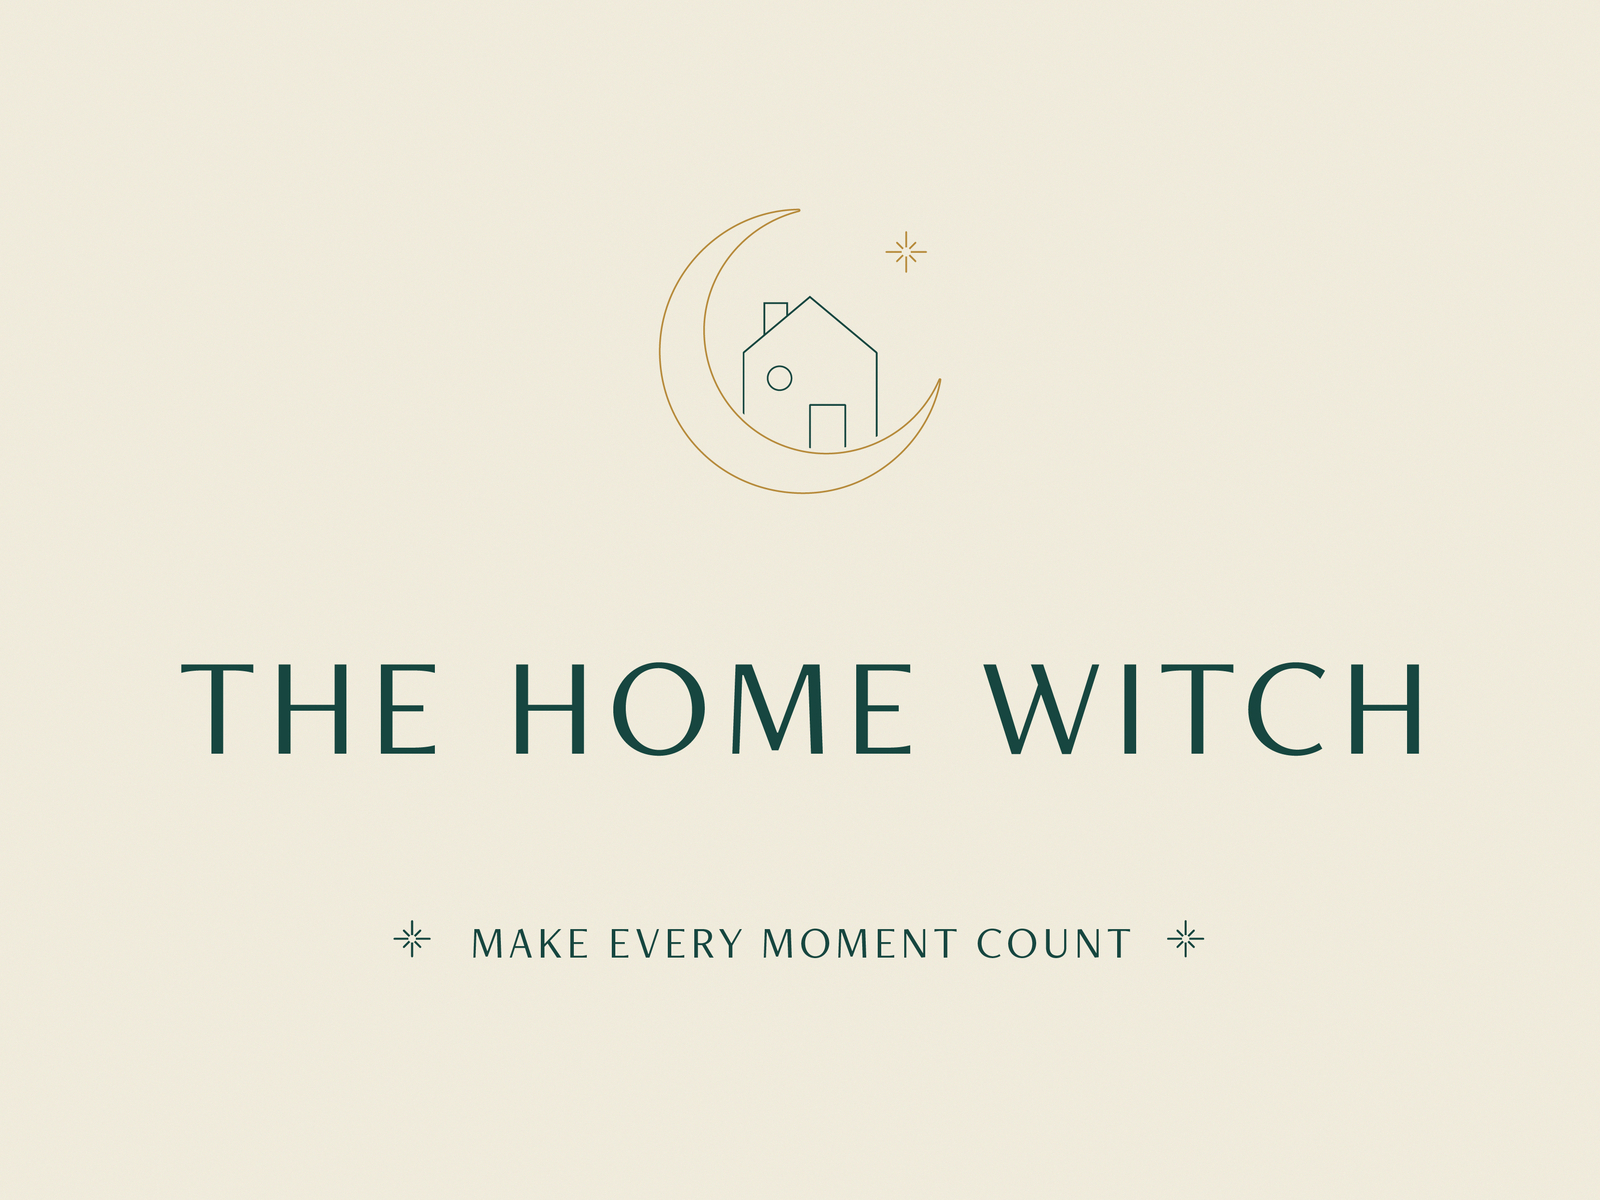 The Home Witch - Brand Details by Whitney Regeth on Dribbble